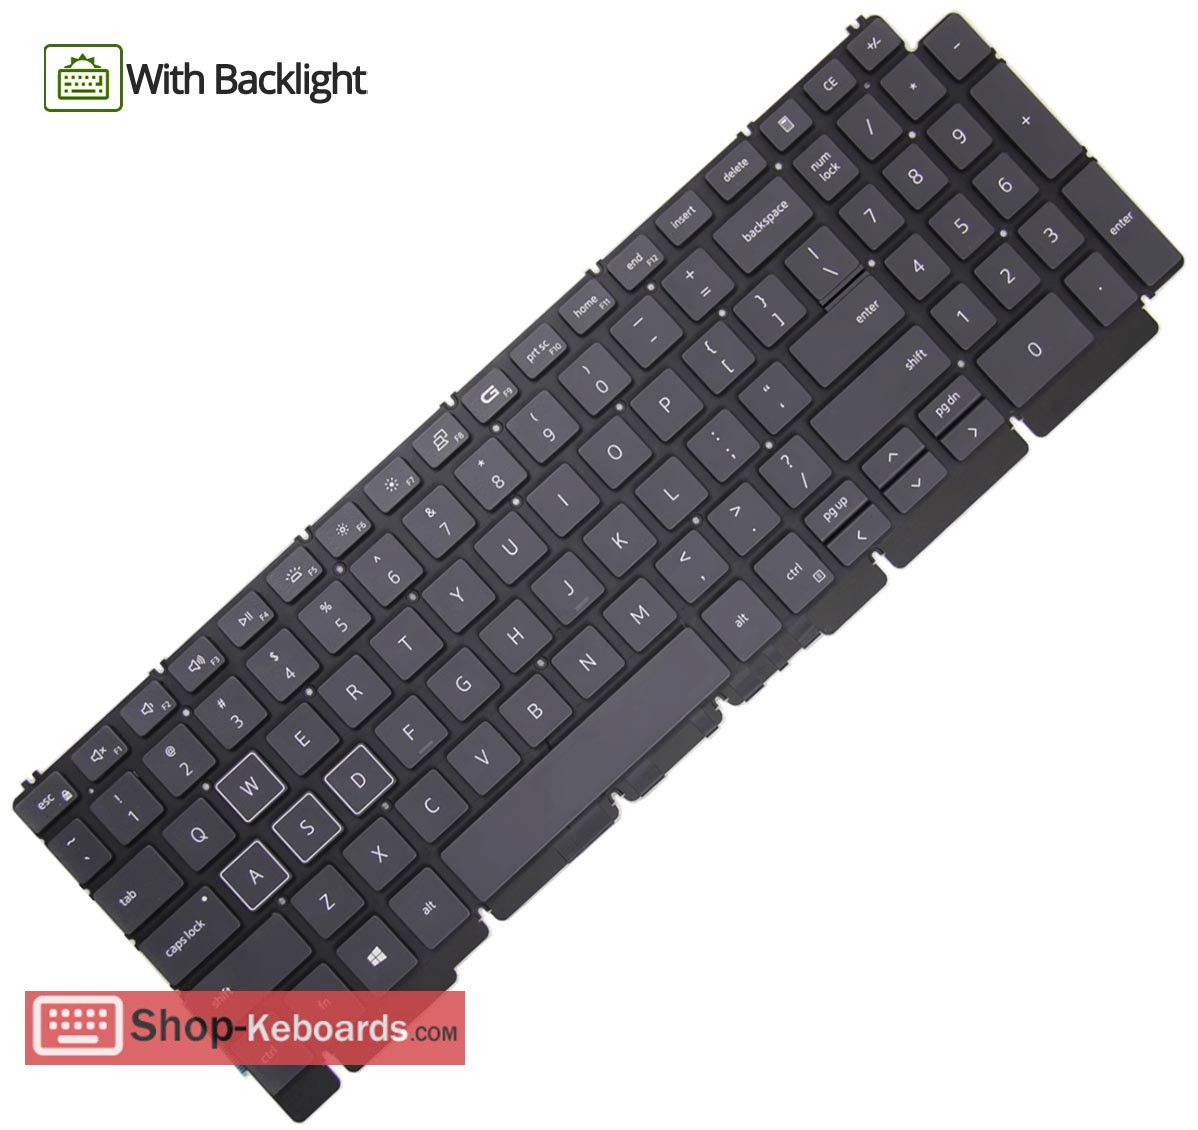 Dell INSPIRON 15 5518 Keyboard replacement